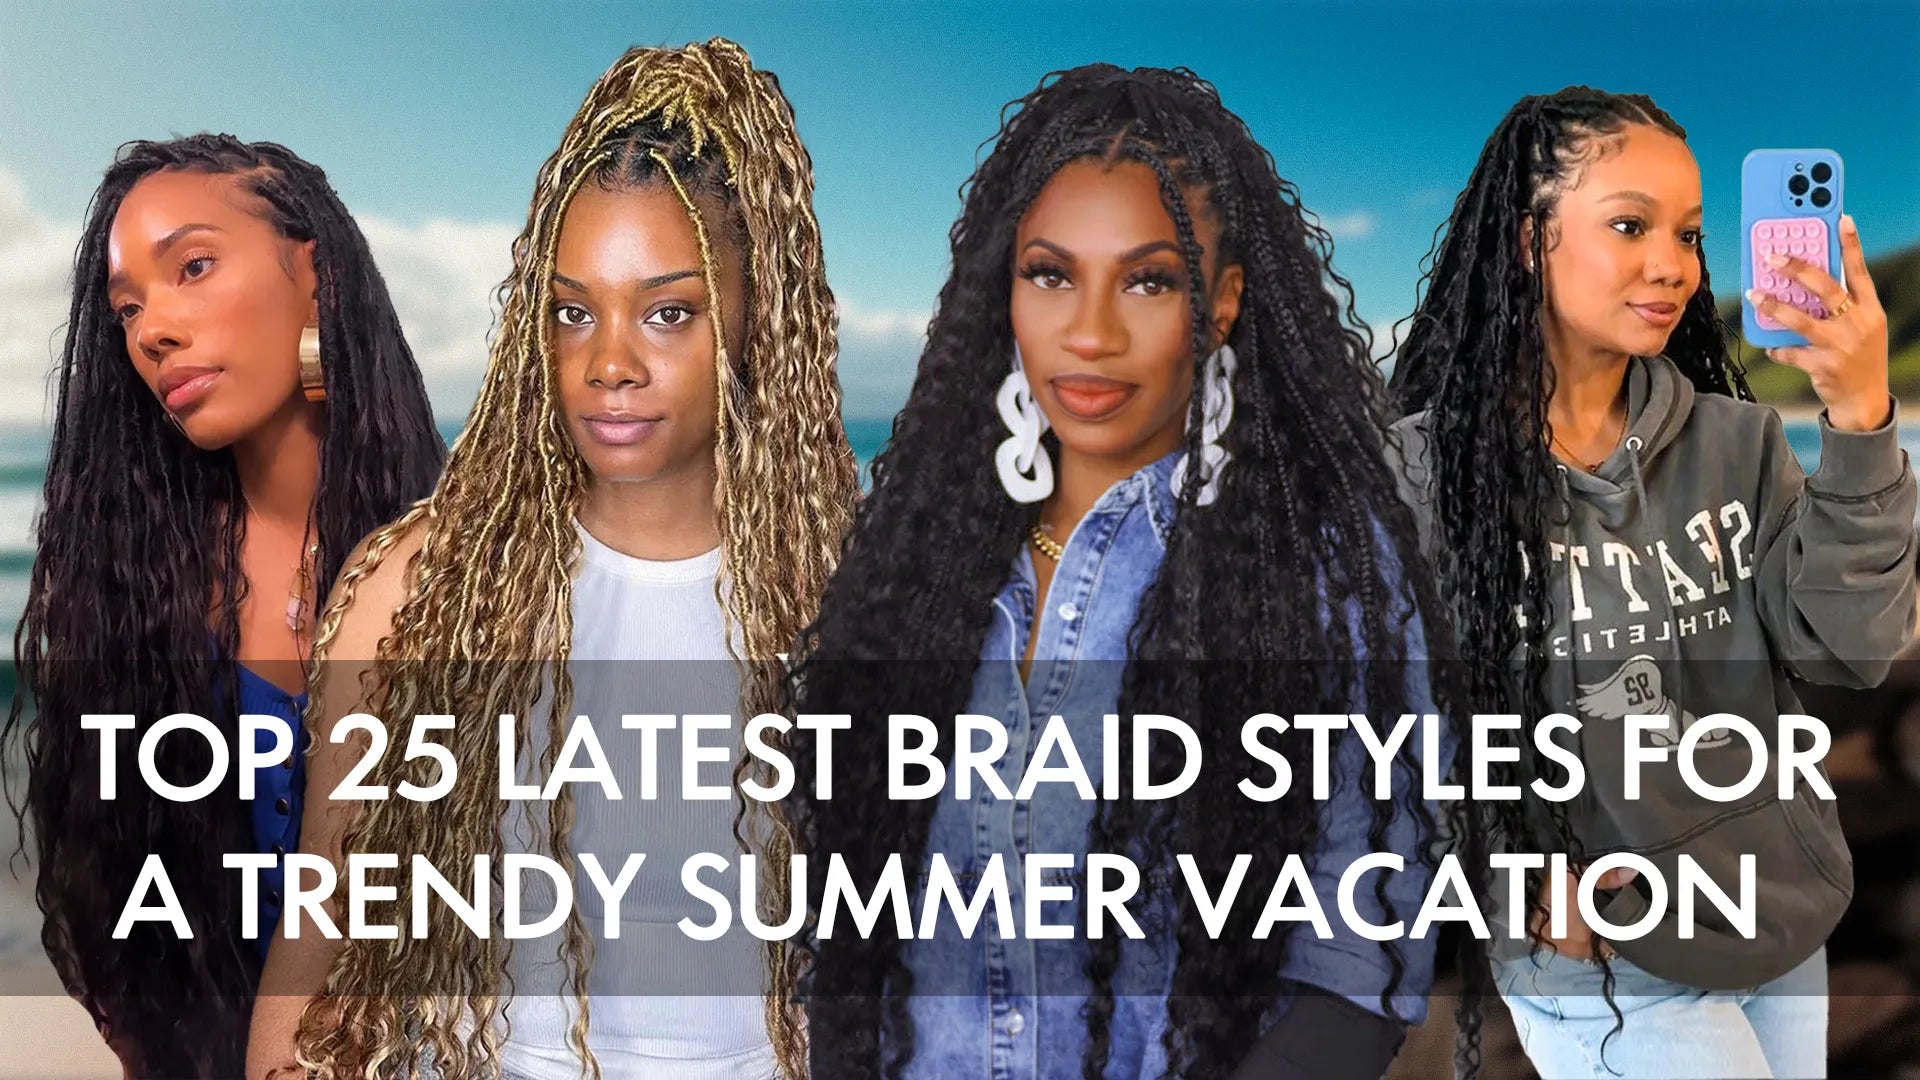 Top 25 Latest Braid Styles for a Trendy Summer Vacation